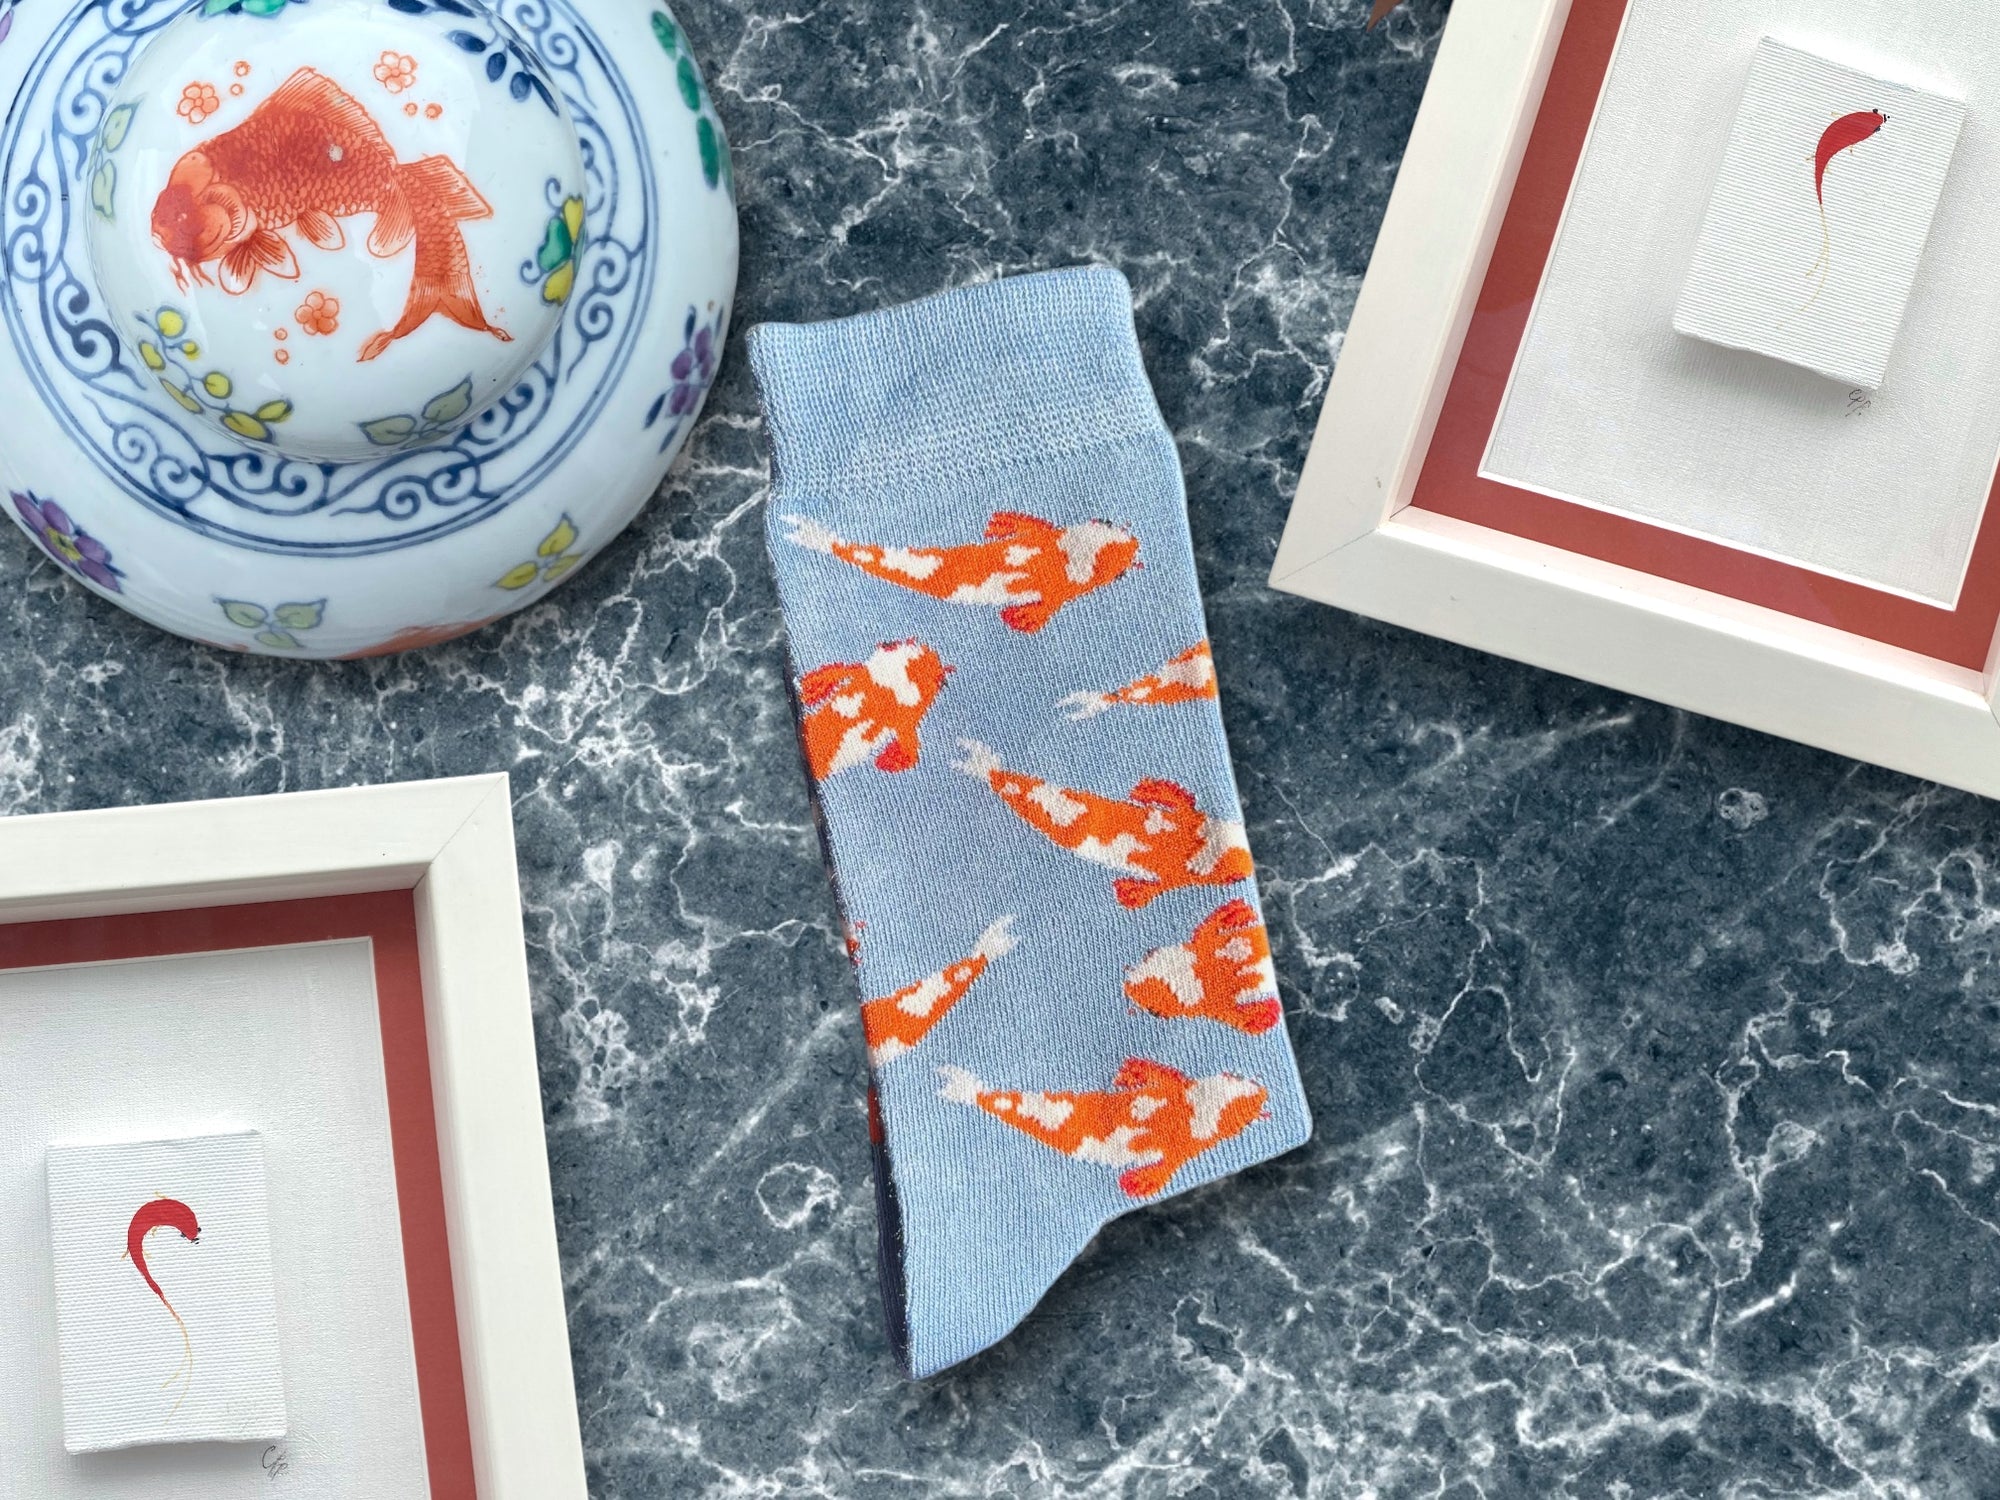 Koi Fish Pattern on a Light Blue Socks on a marble surface